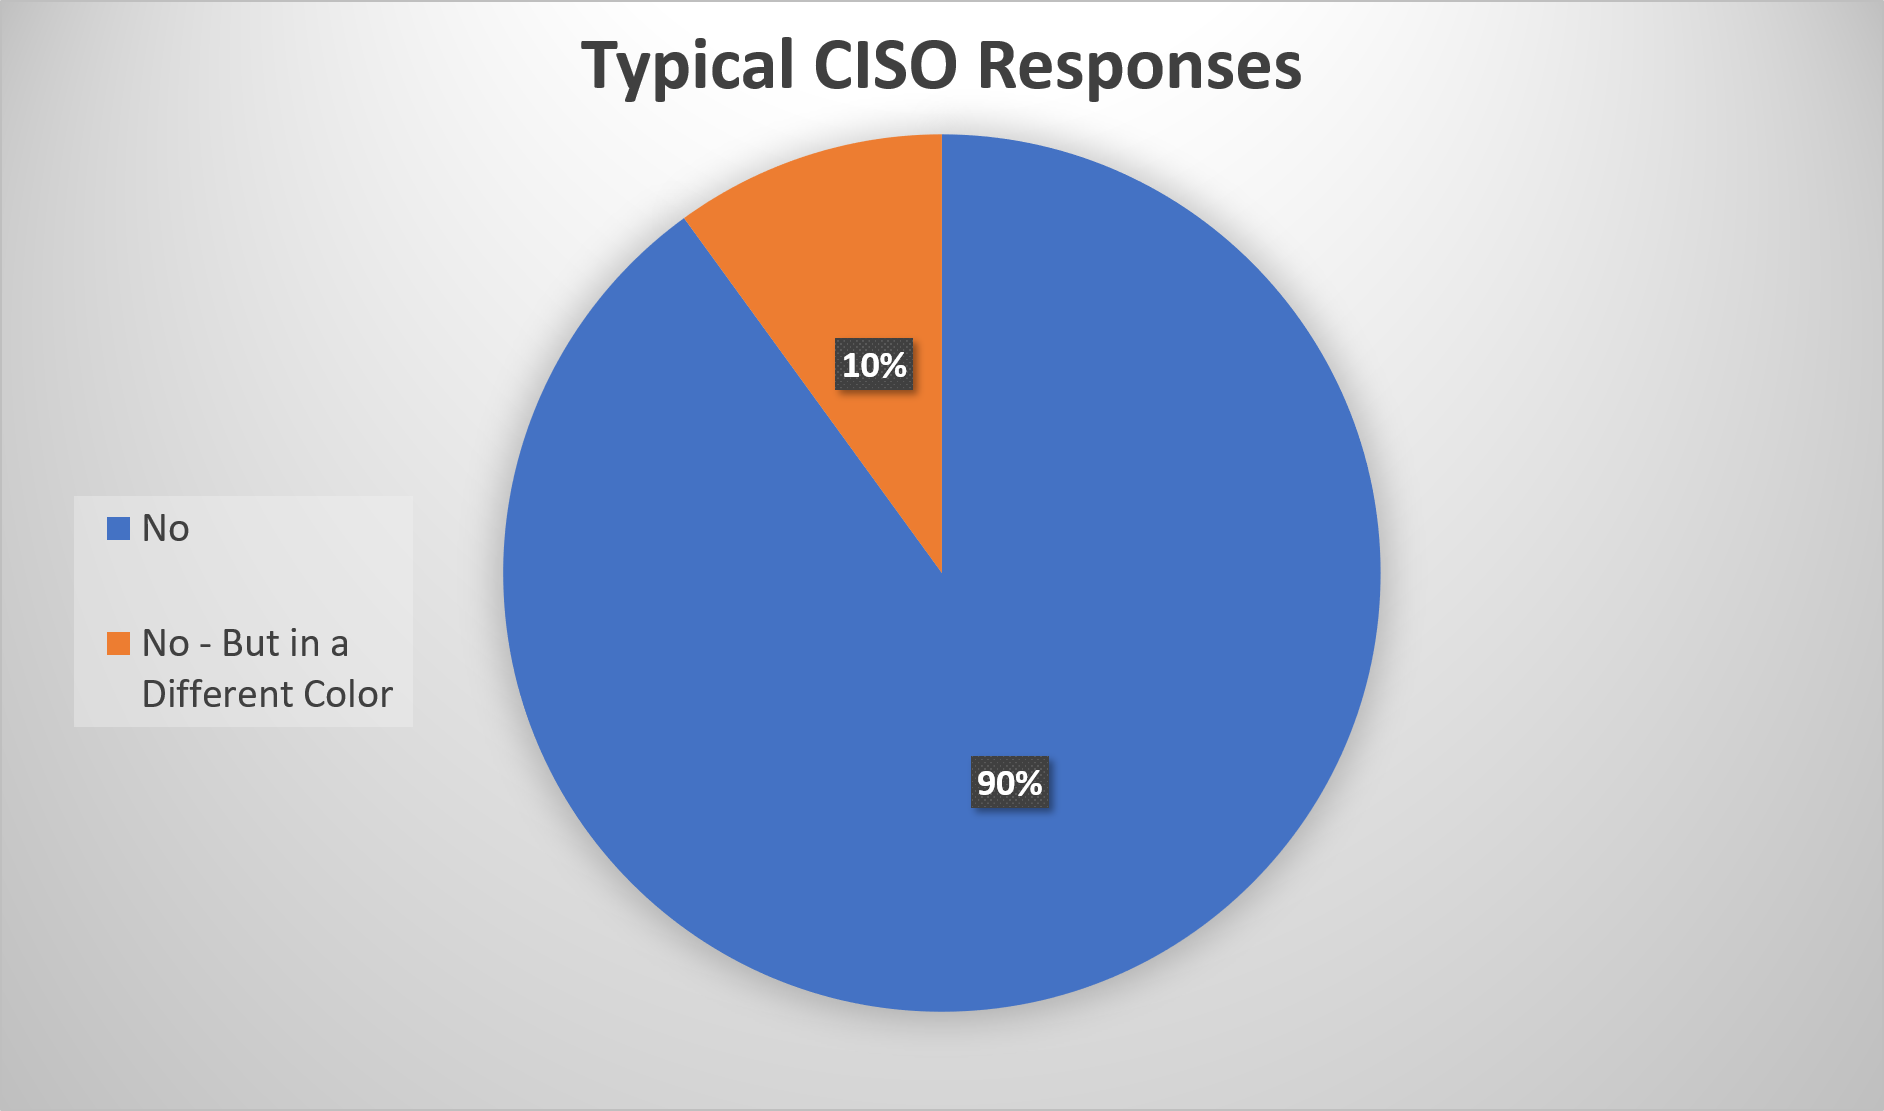 Typical CISO responses to any approach